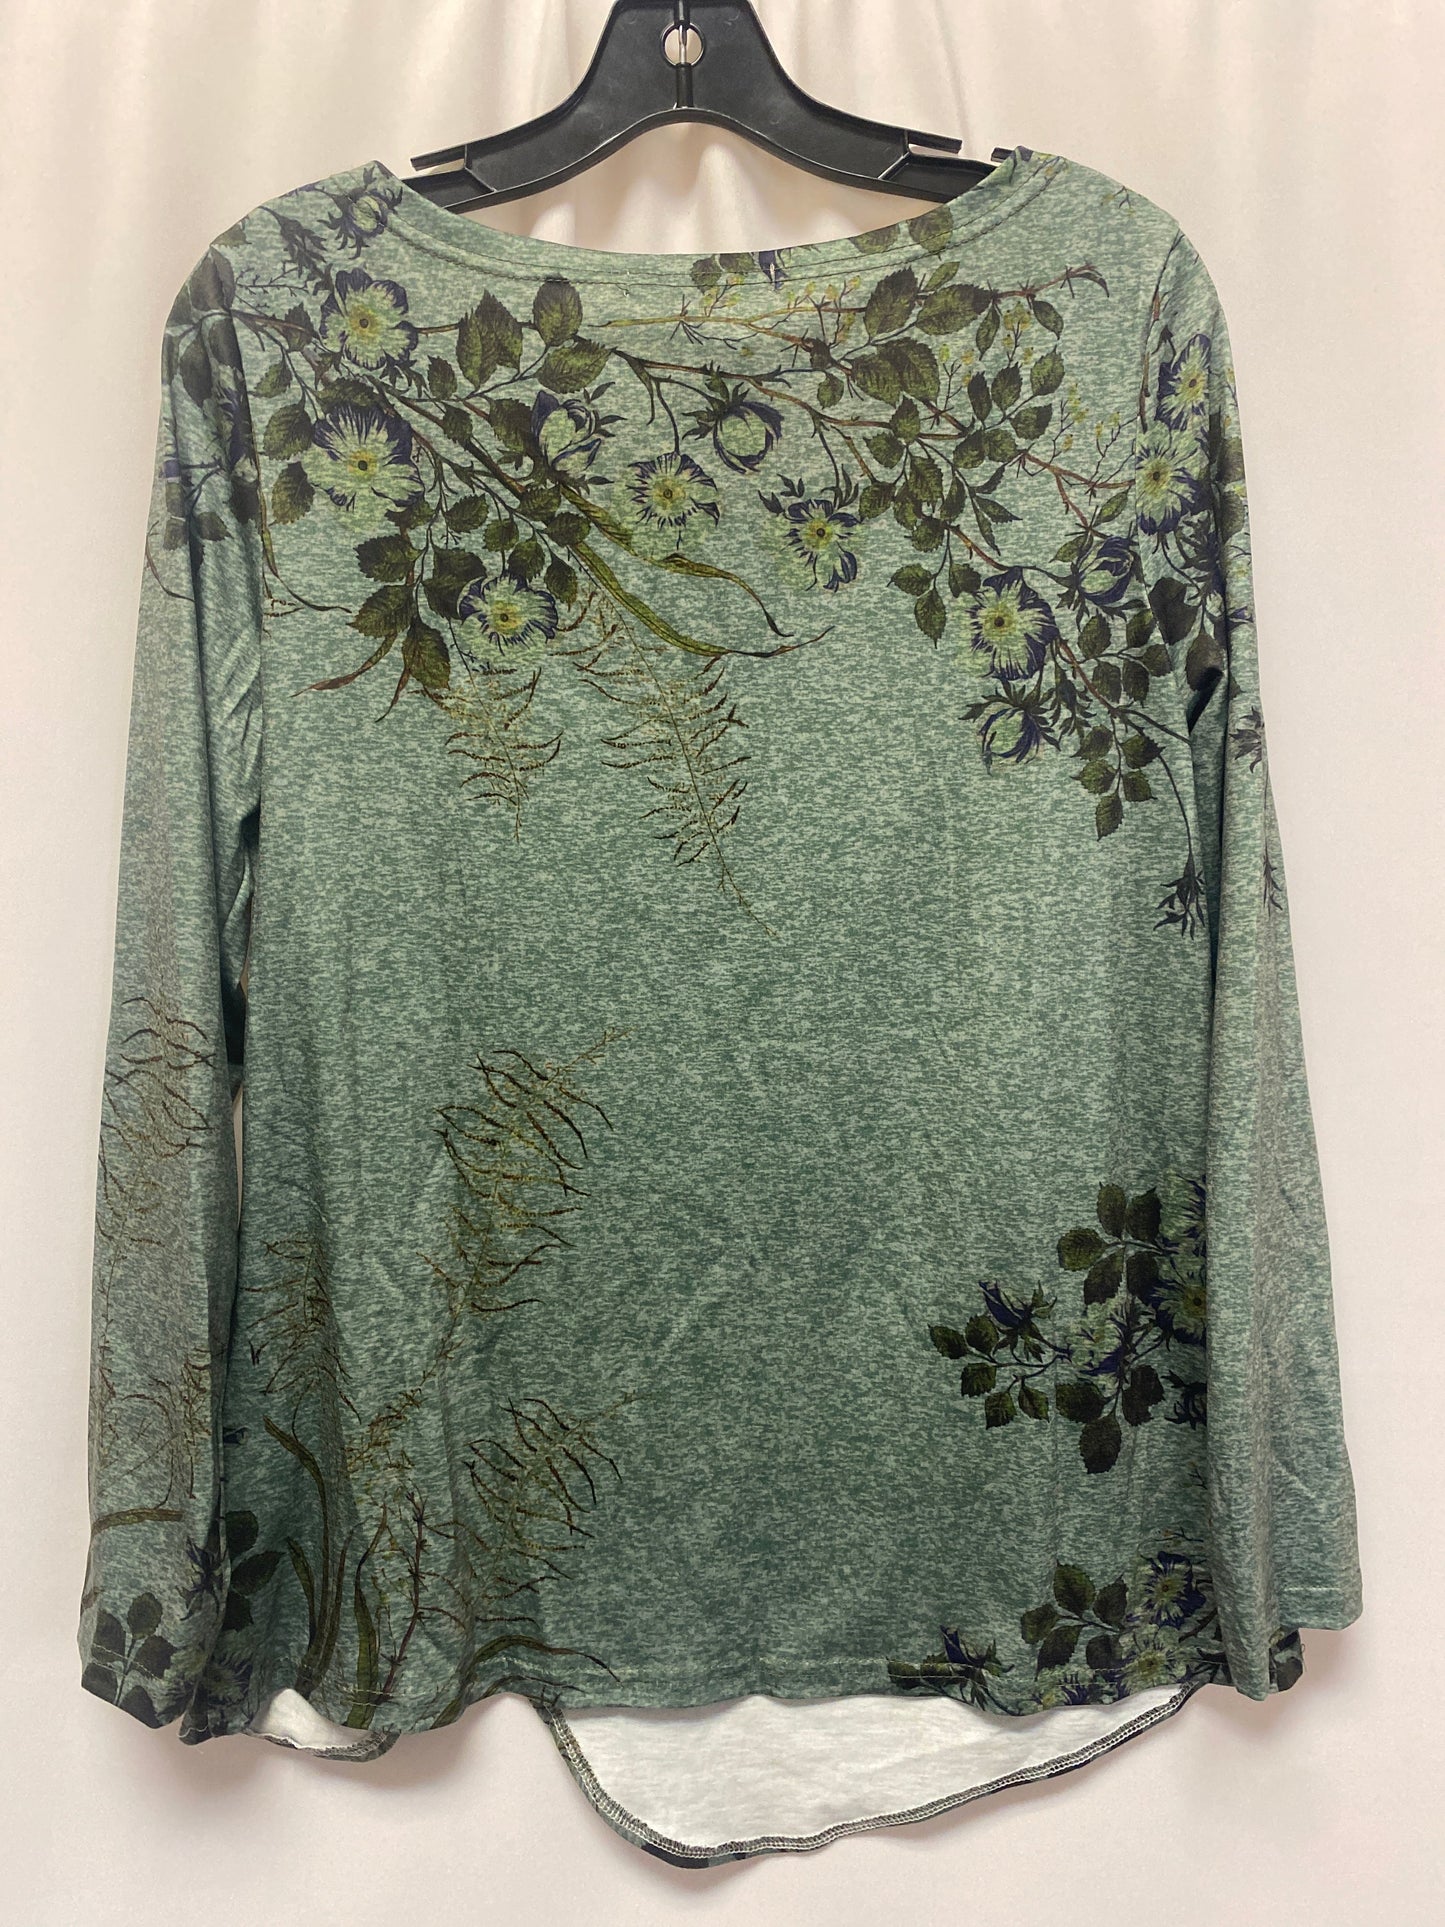 Green Top Long Sleeve Misslook, Size M